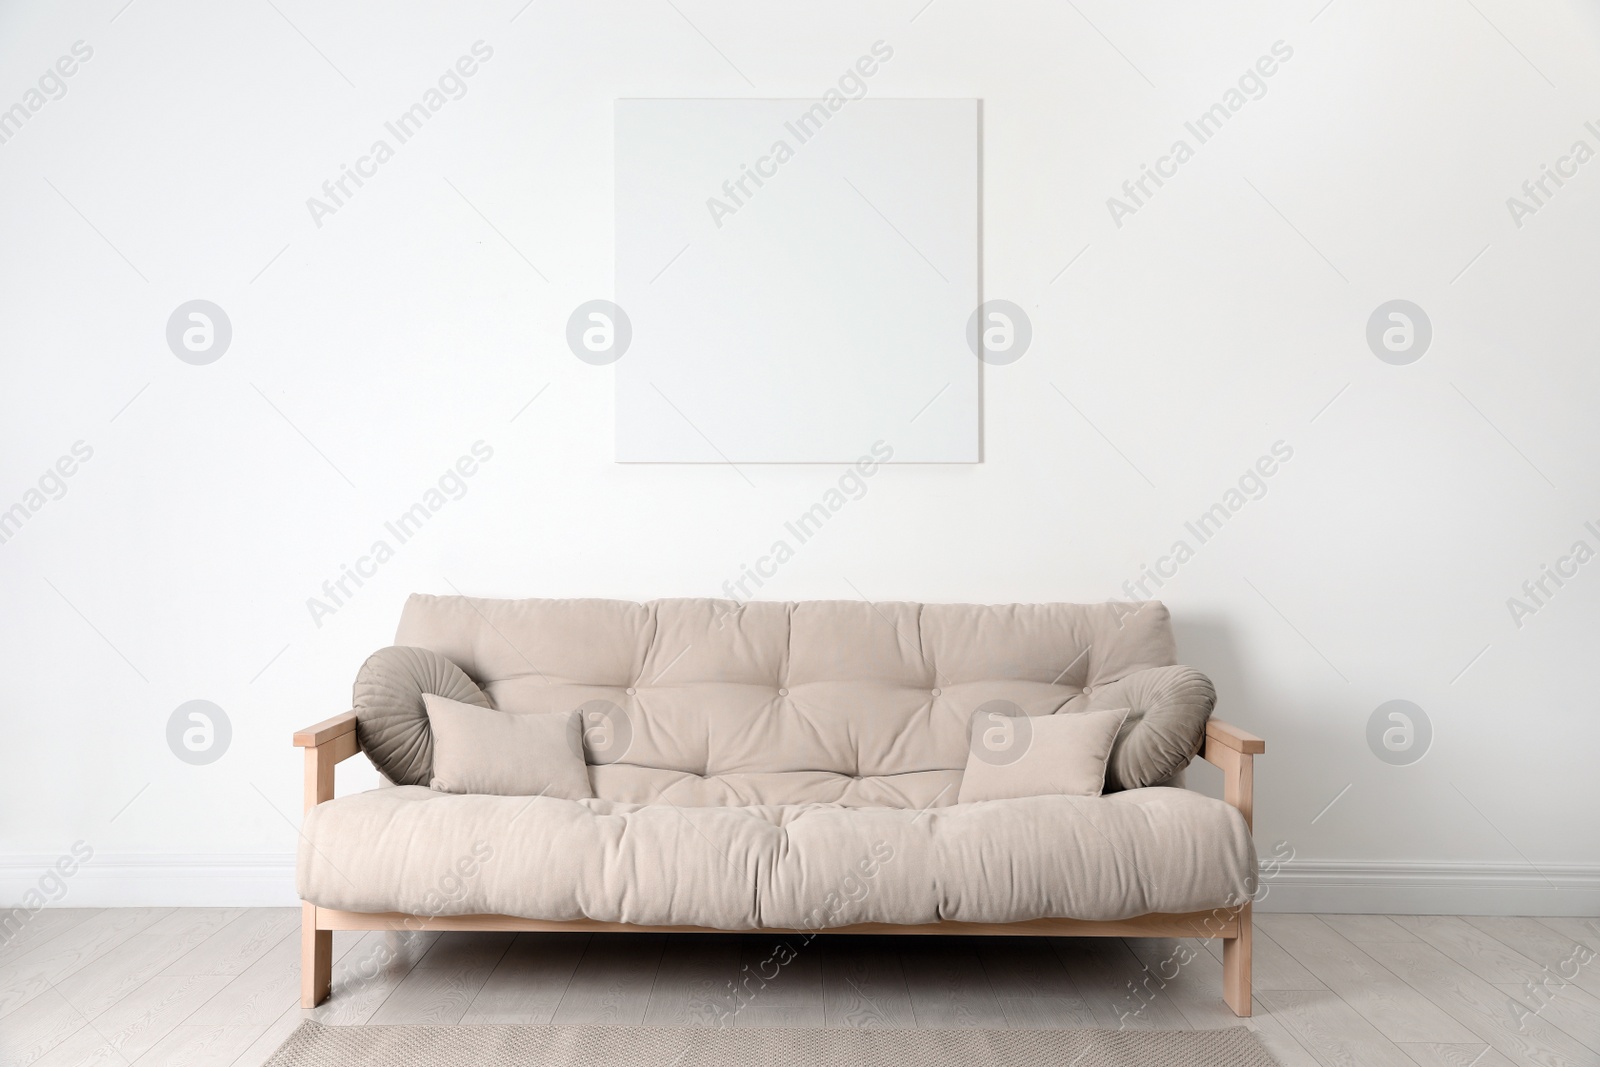 Photo of Blank canvas on wall over beige sofa indoors. Space for design